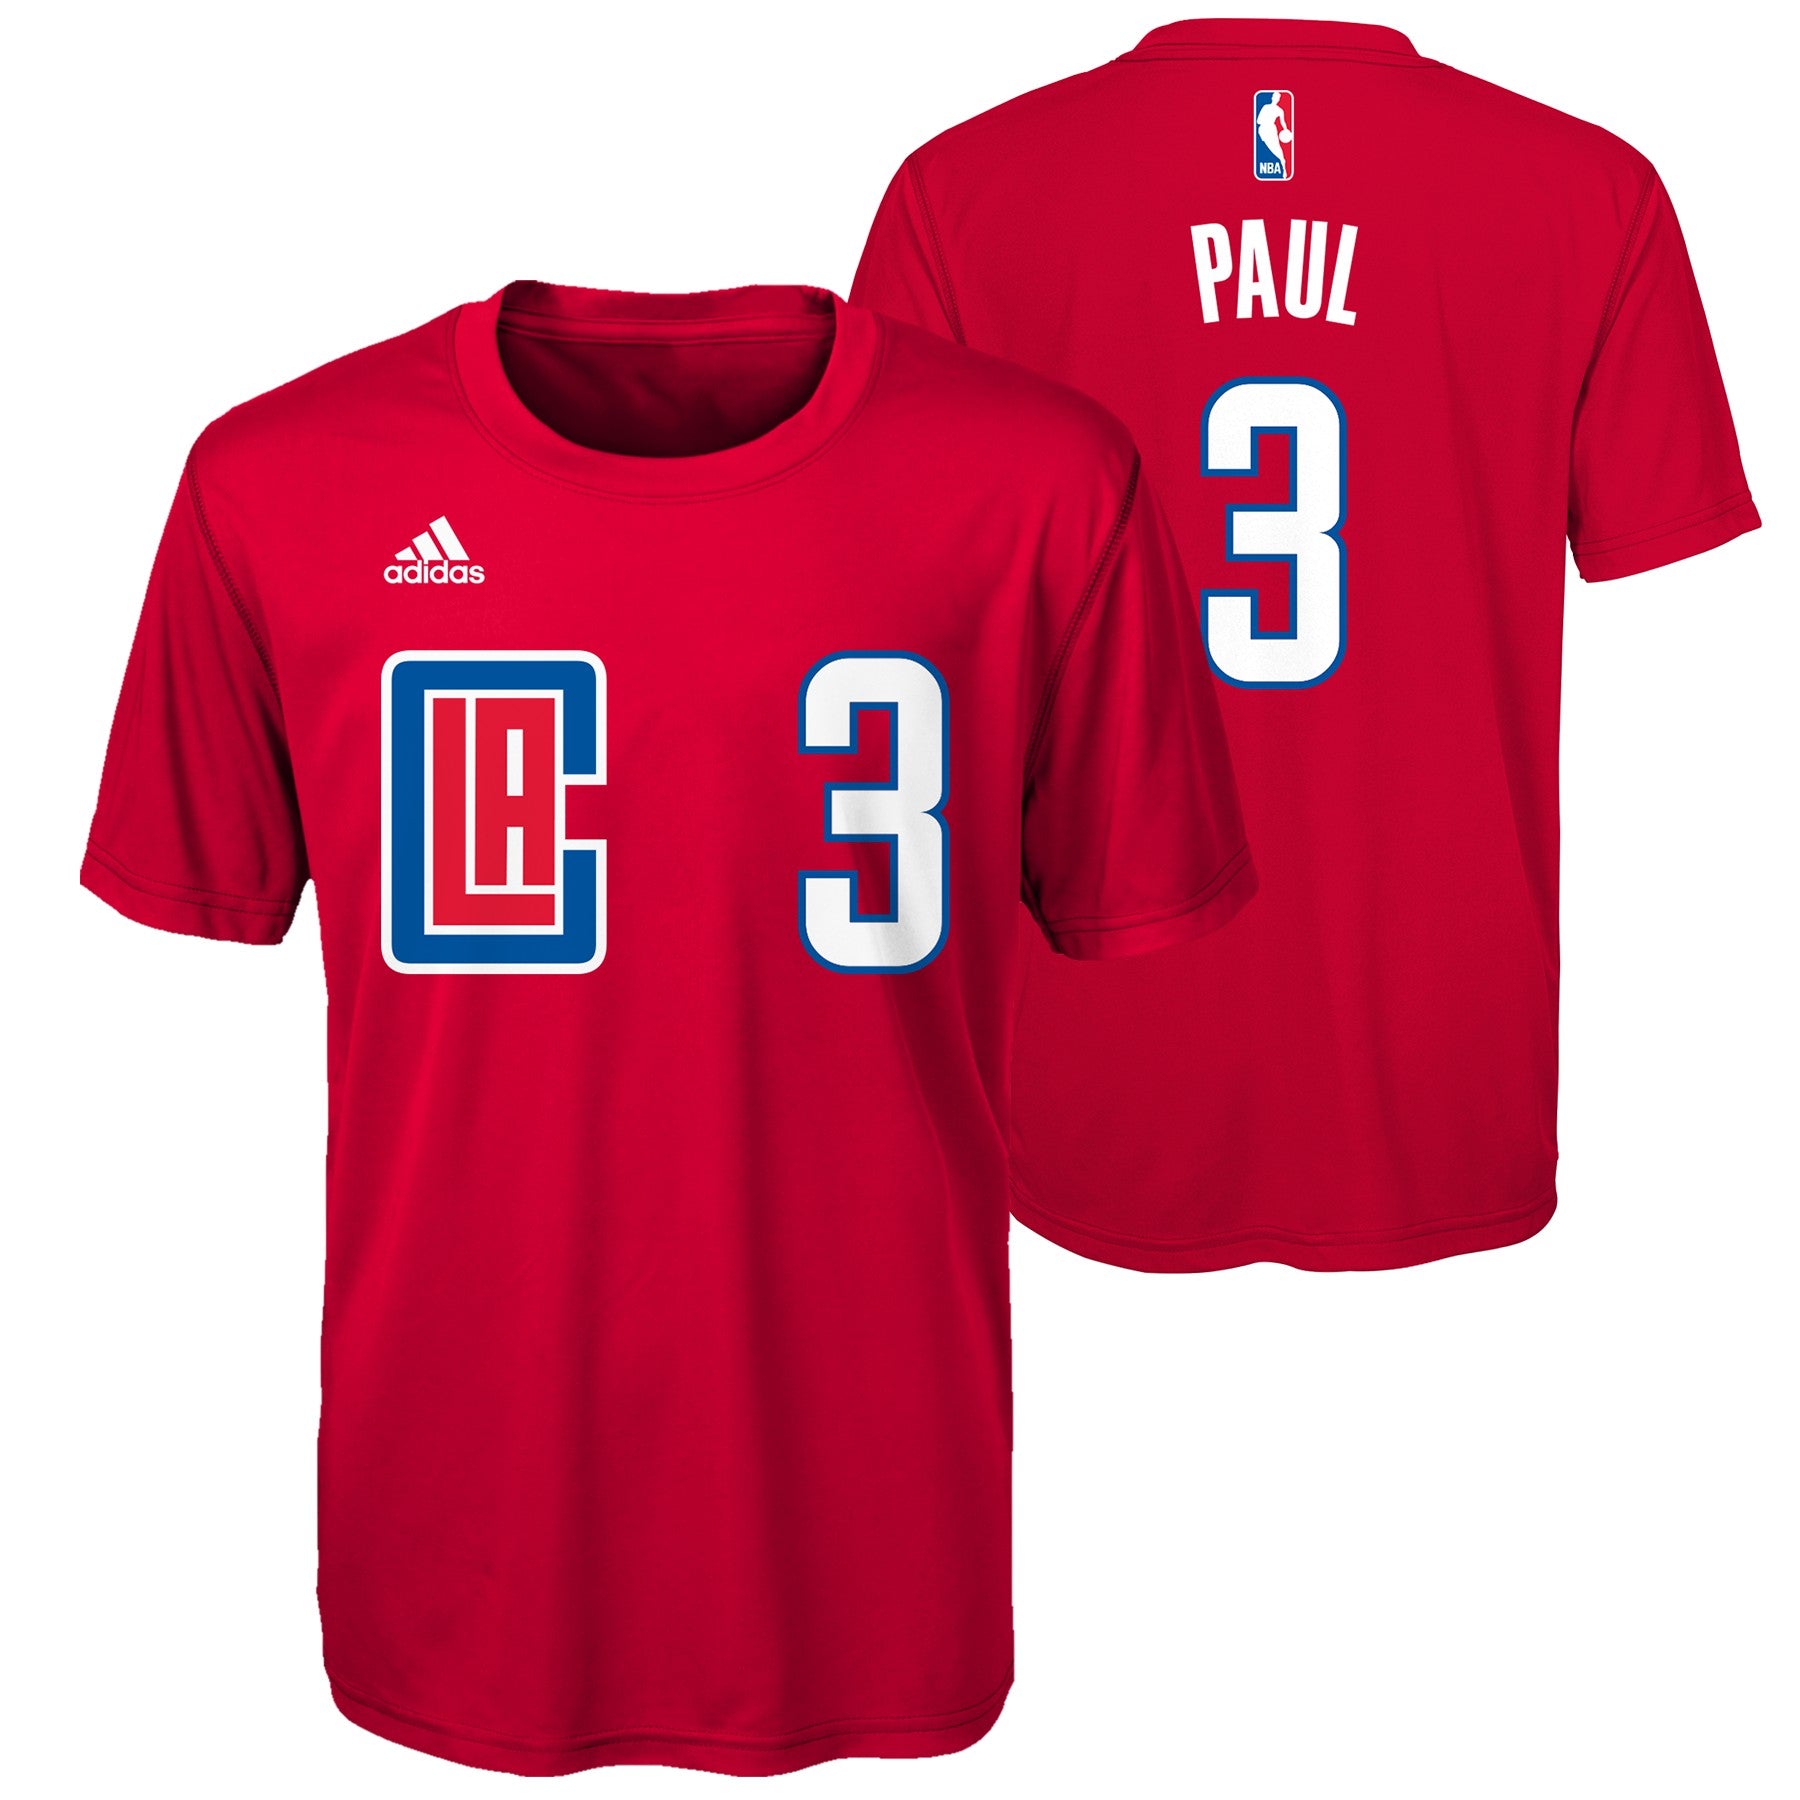 Adidas Los Angeles Clippers *Paul* NBA Shirt S S